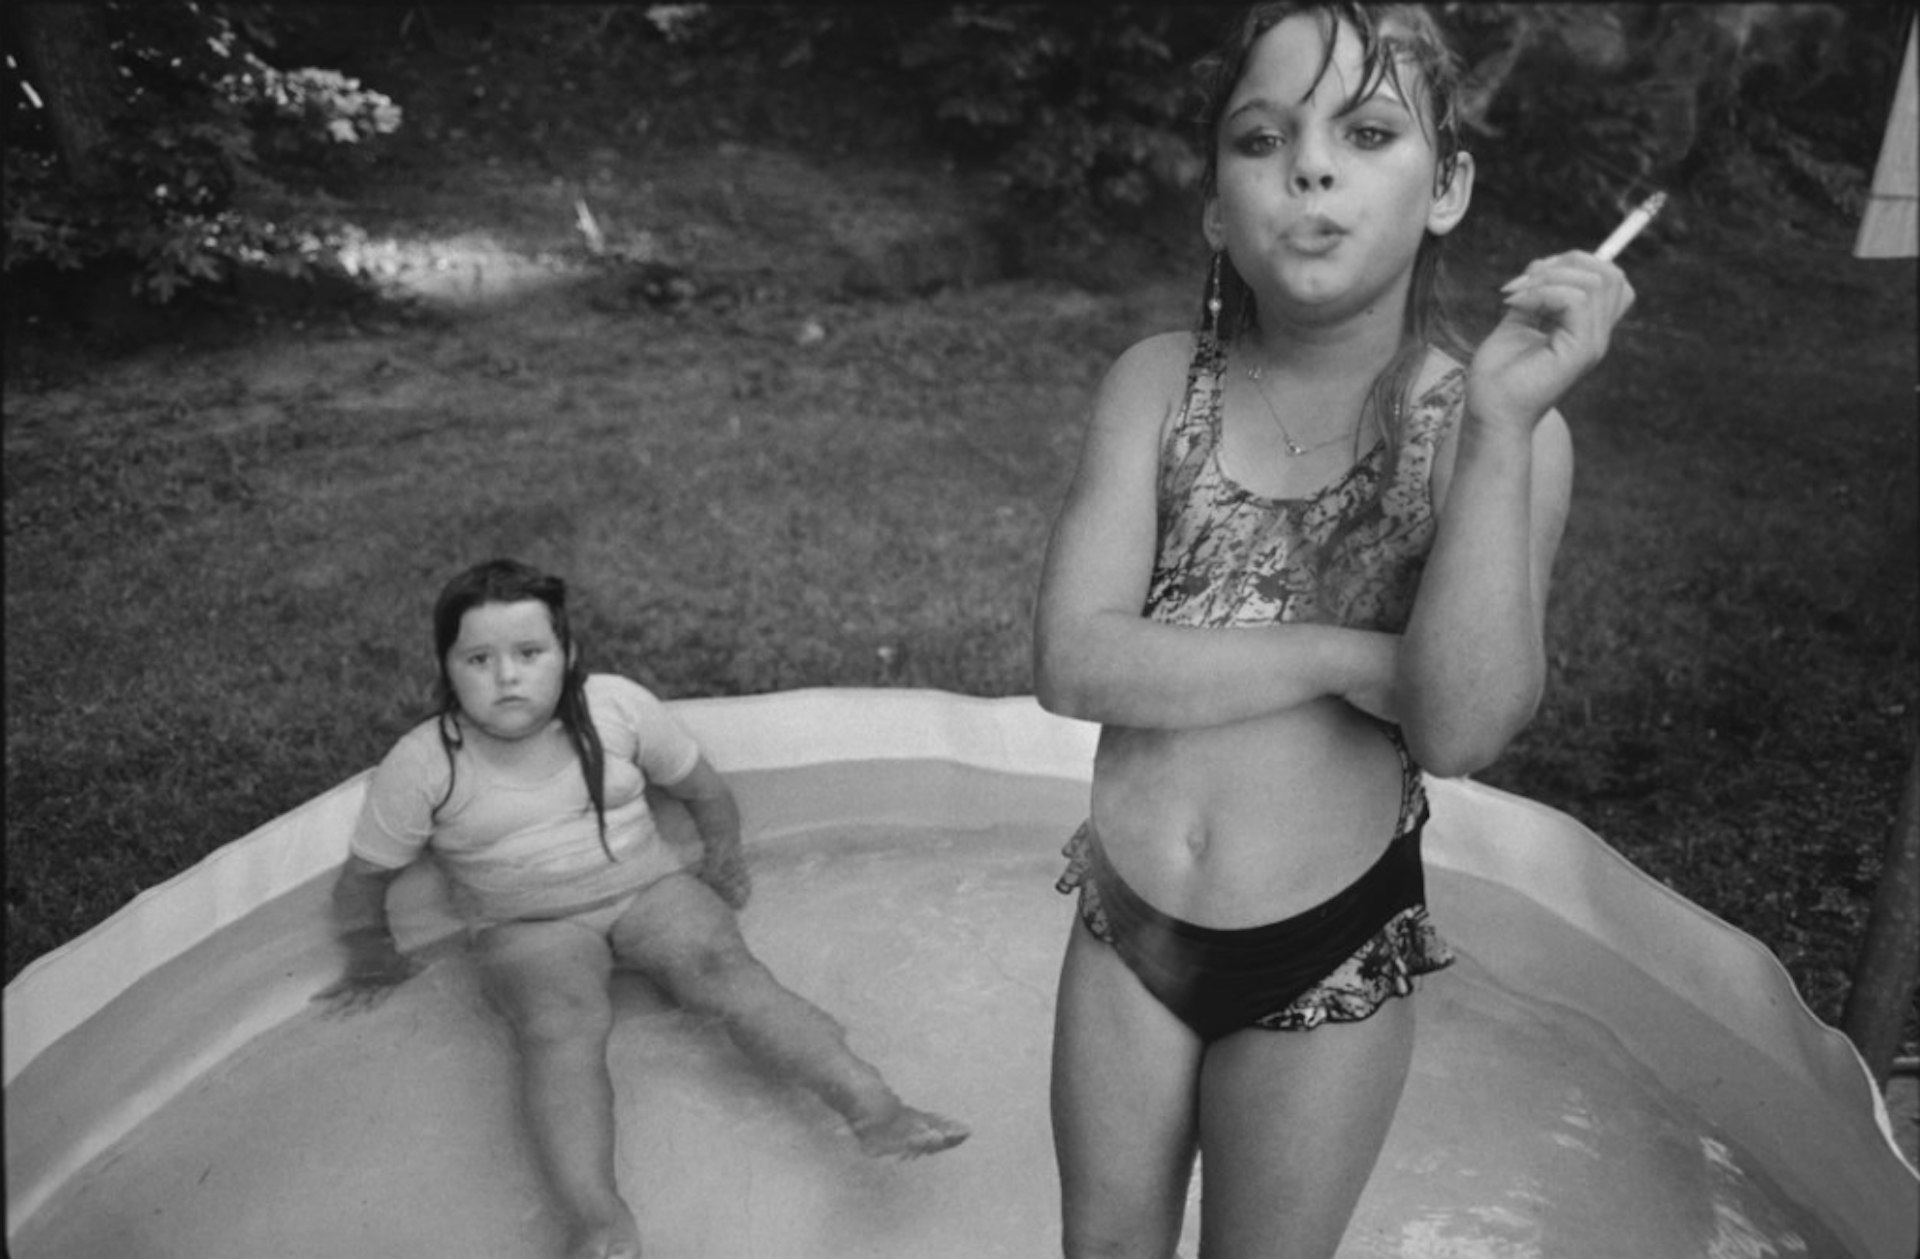 Photographer of the dispossessed Mary Ellen Mark on how she'd like to be remembered